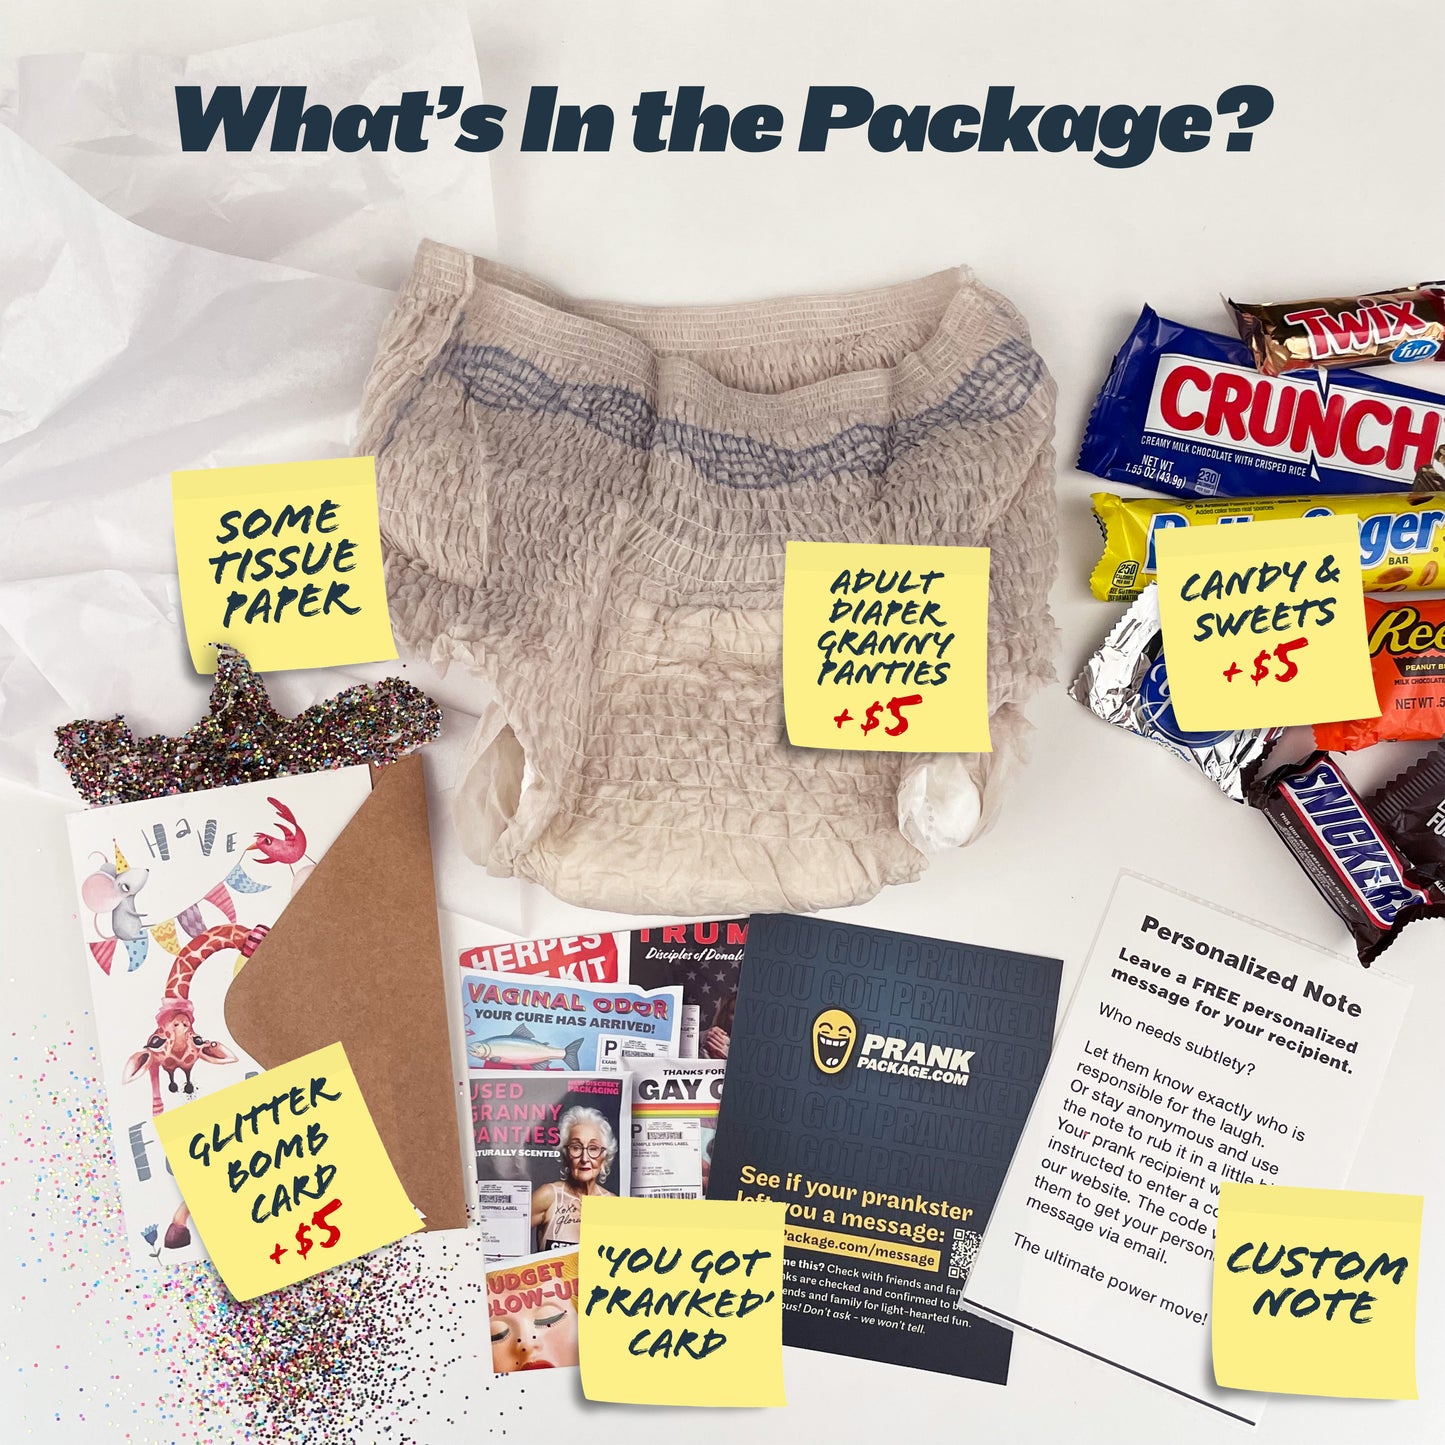 Items included in the Granny Panties Prank Package: tissue paper, an optional glitter bomb greeting card (+$5), a personalized note, an actual pair of granny panties (+$5), a 'You Got Pranked' card, and optional candy (+$5).